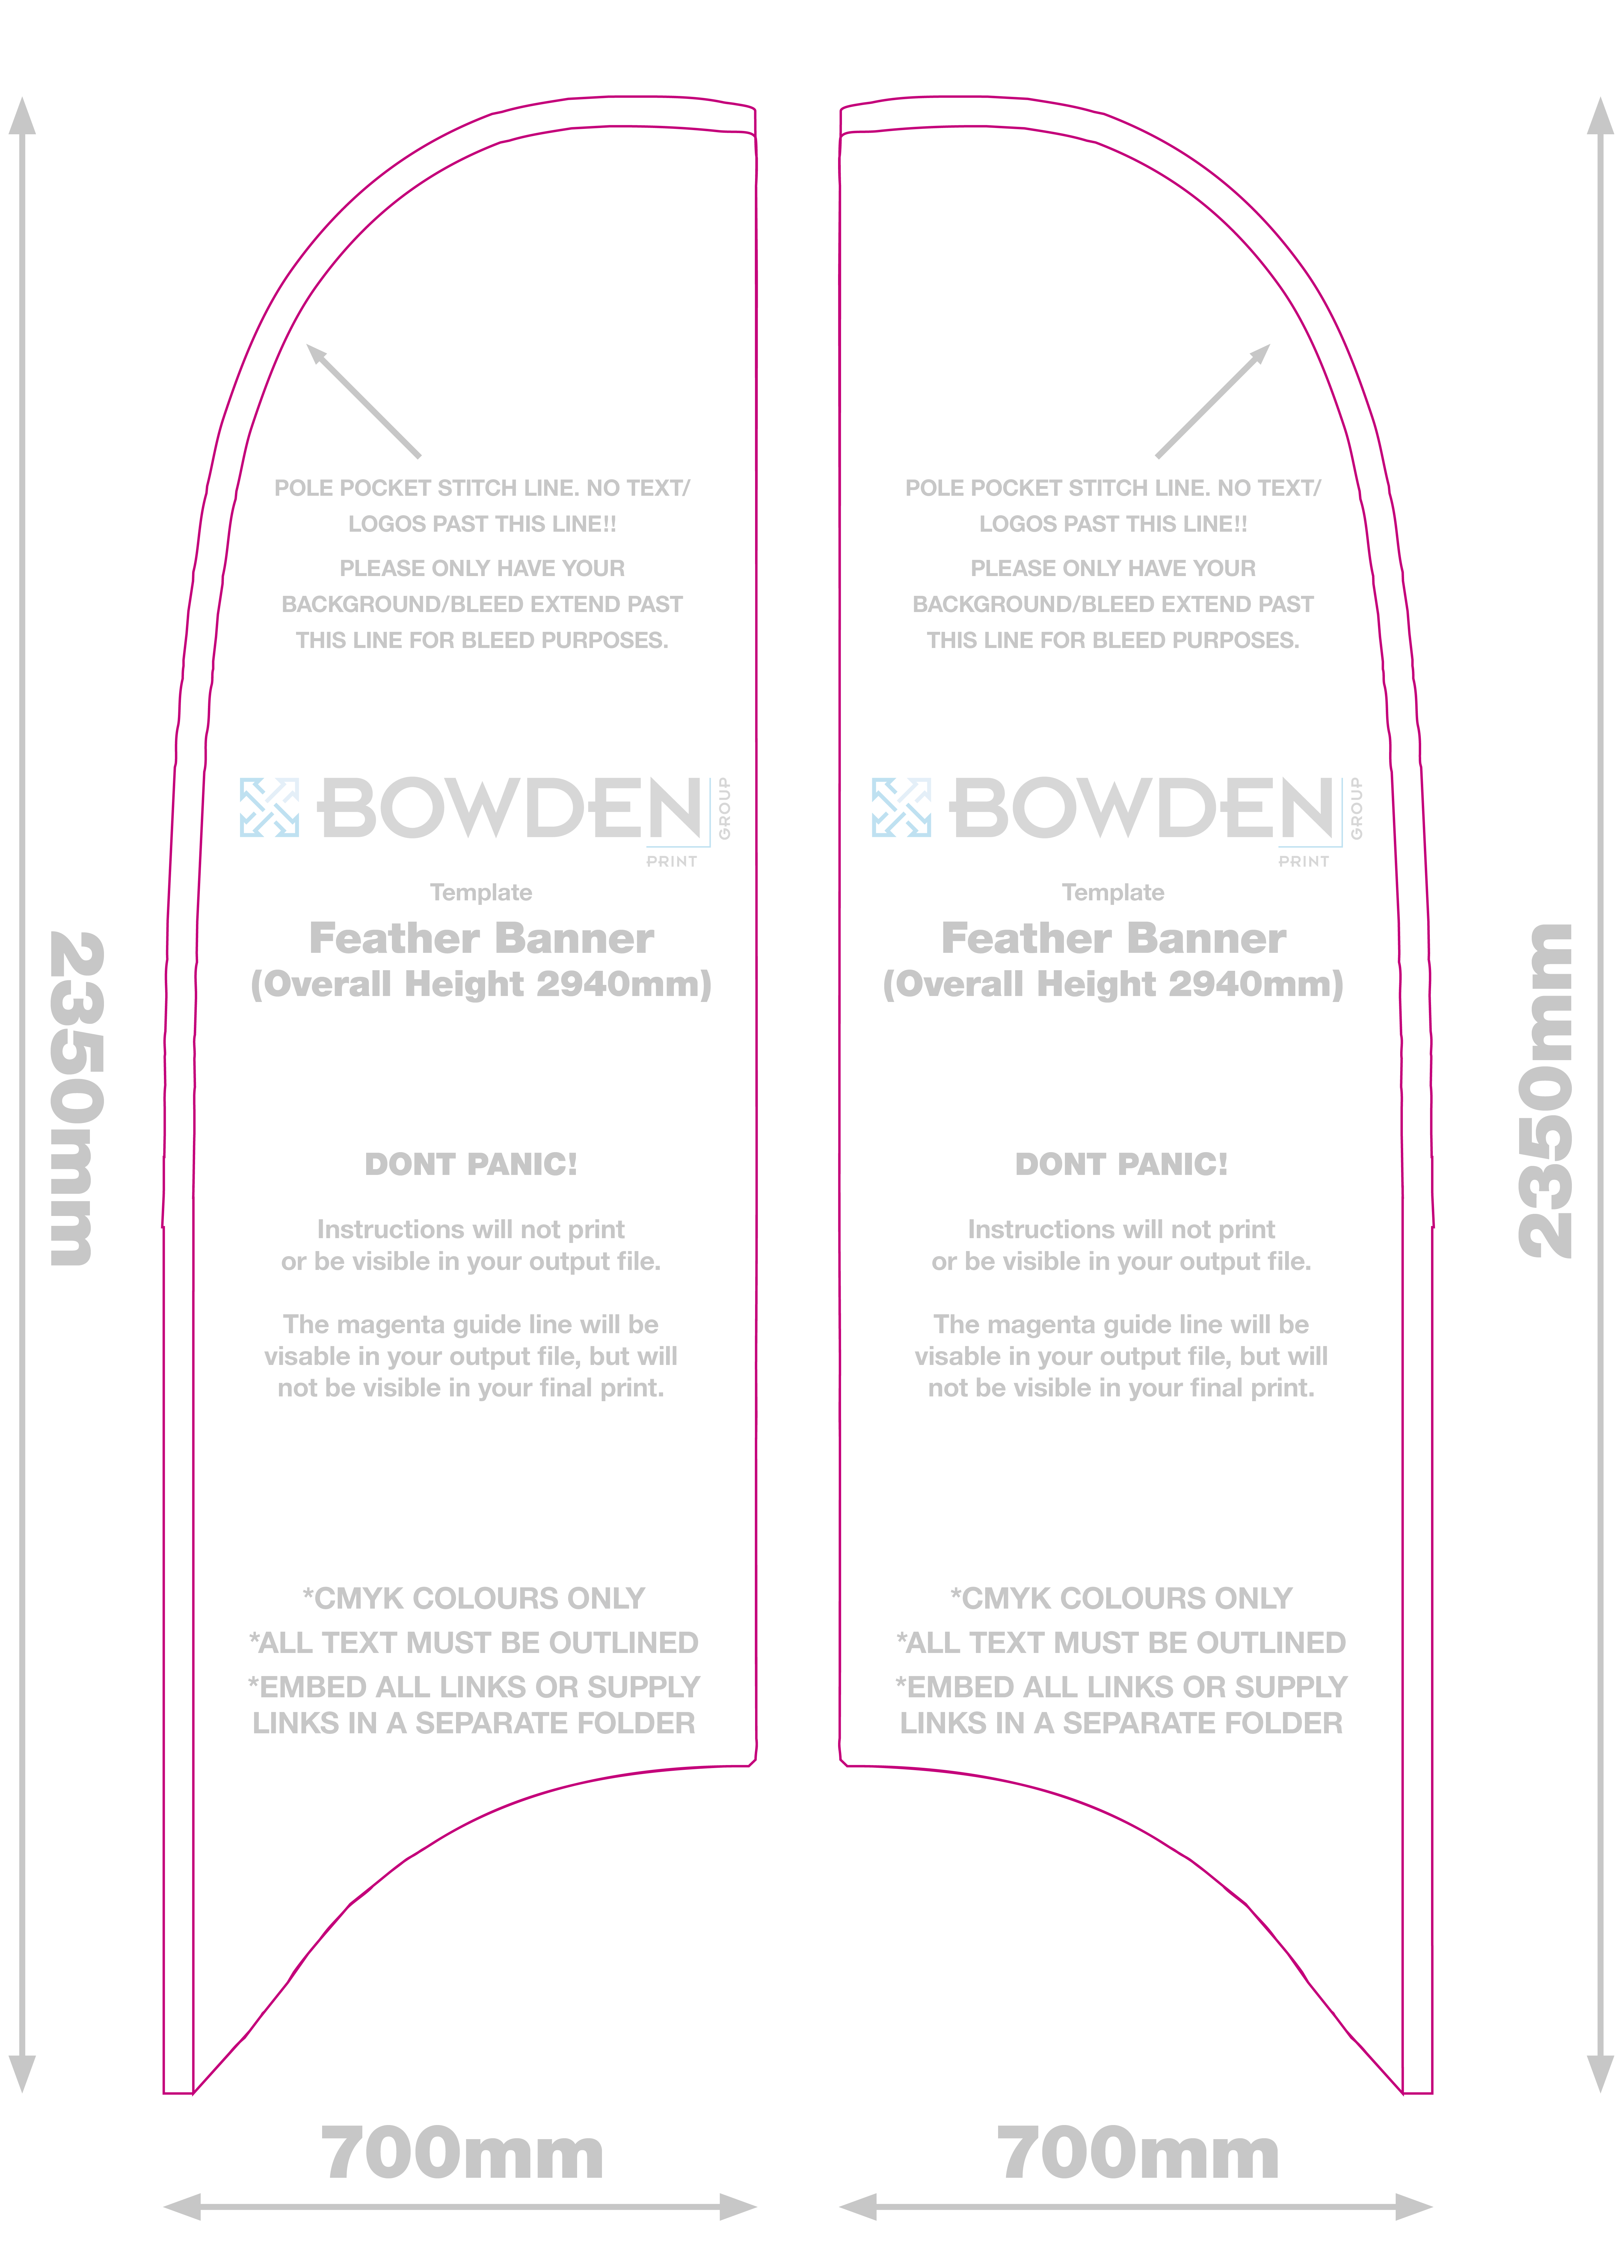 templates-flags-bowden-print-group